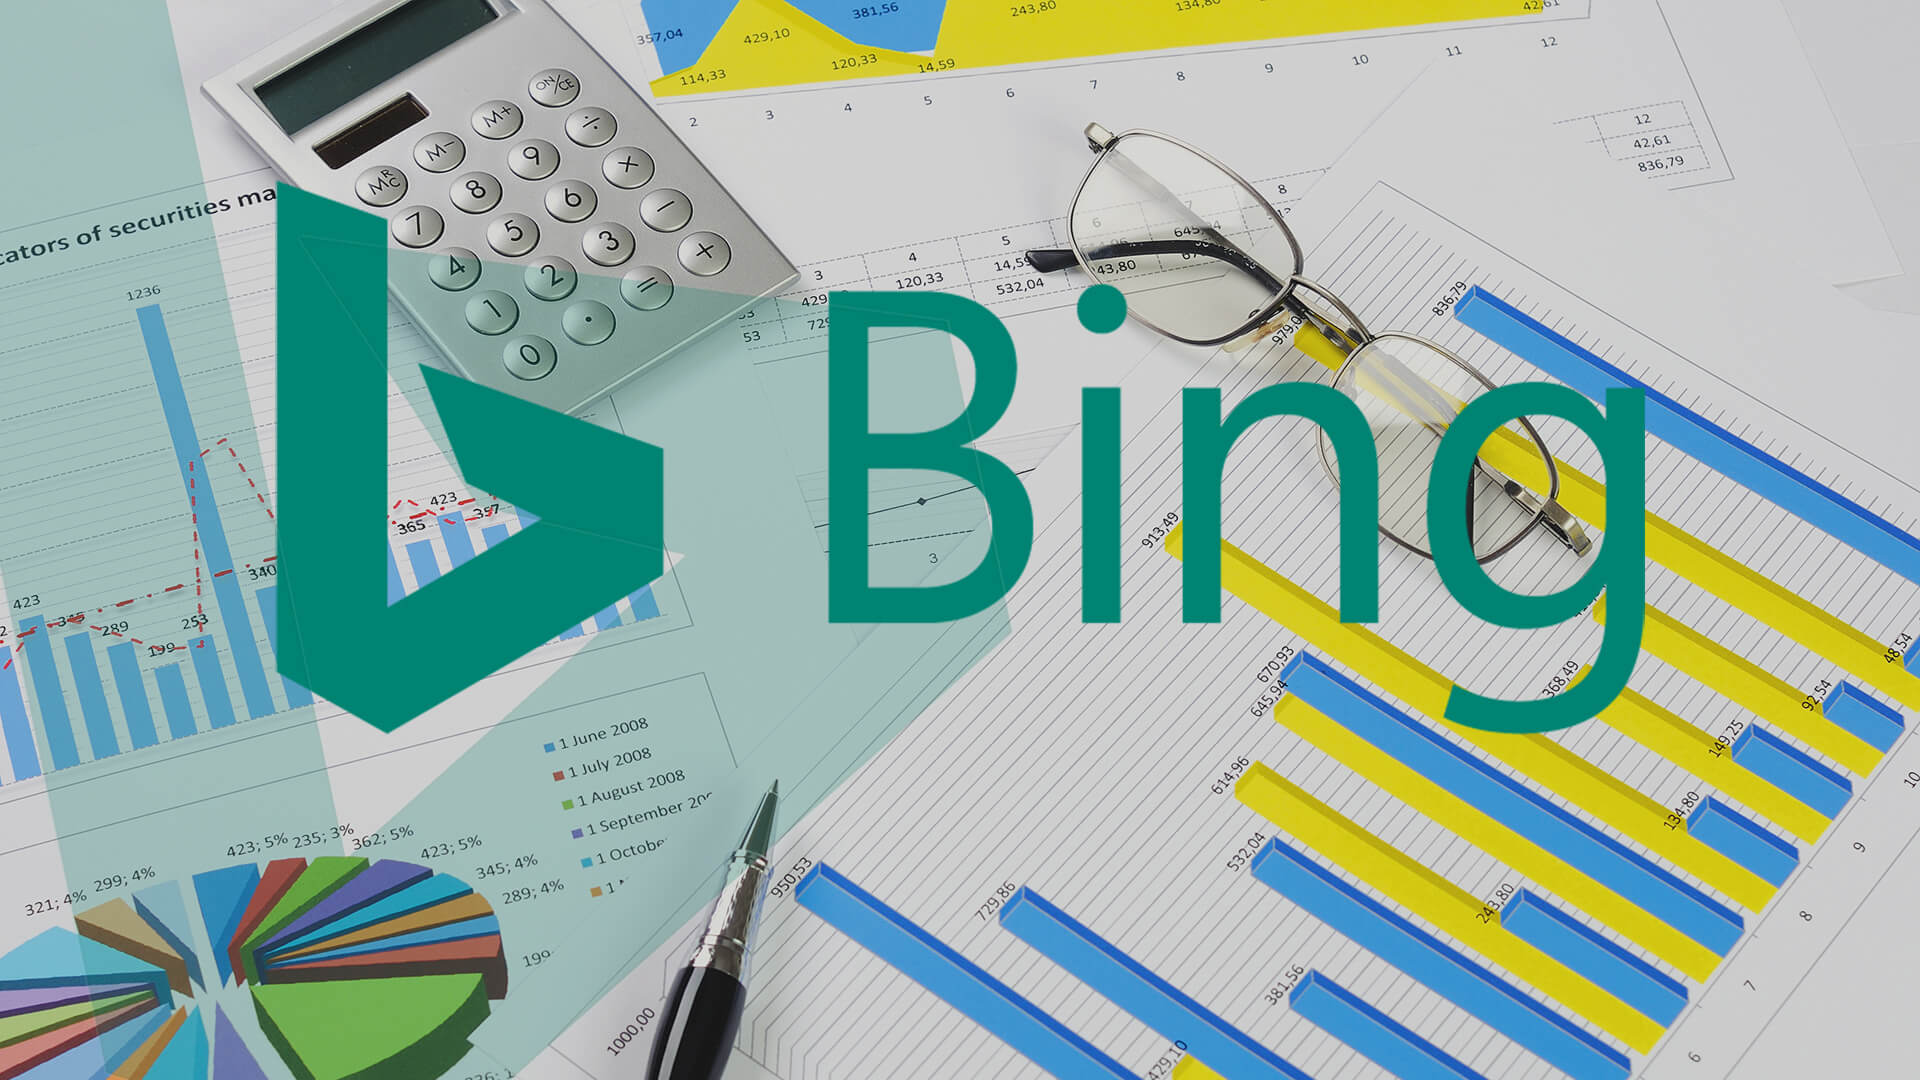 Bing 'intelligent search' capabilities continue to expand, include facts  from multiple sources